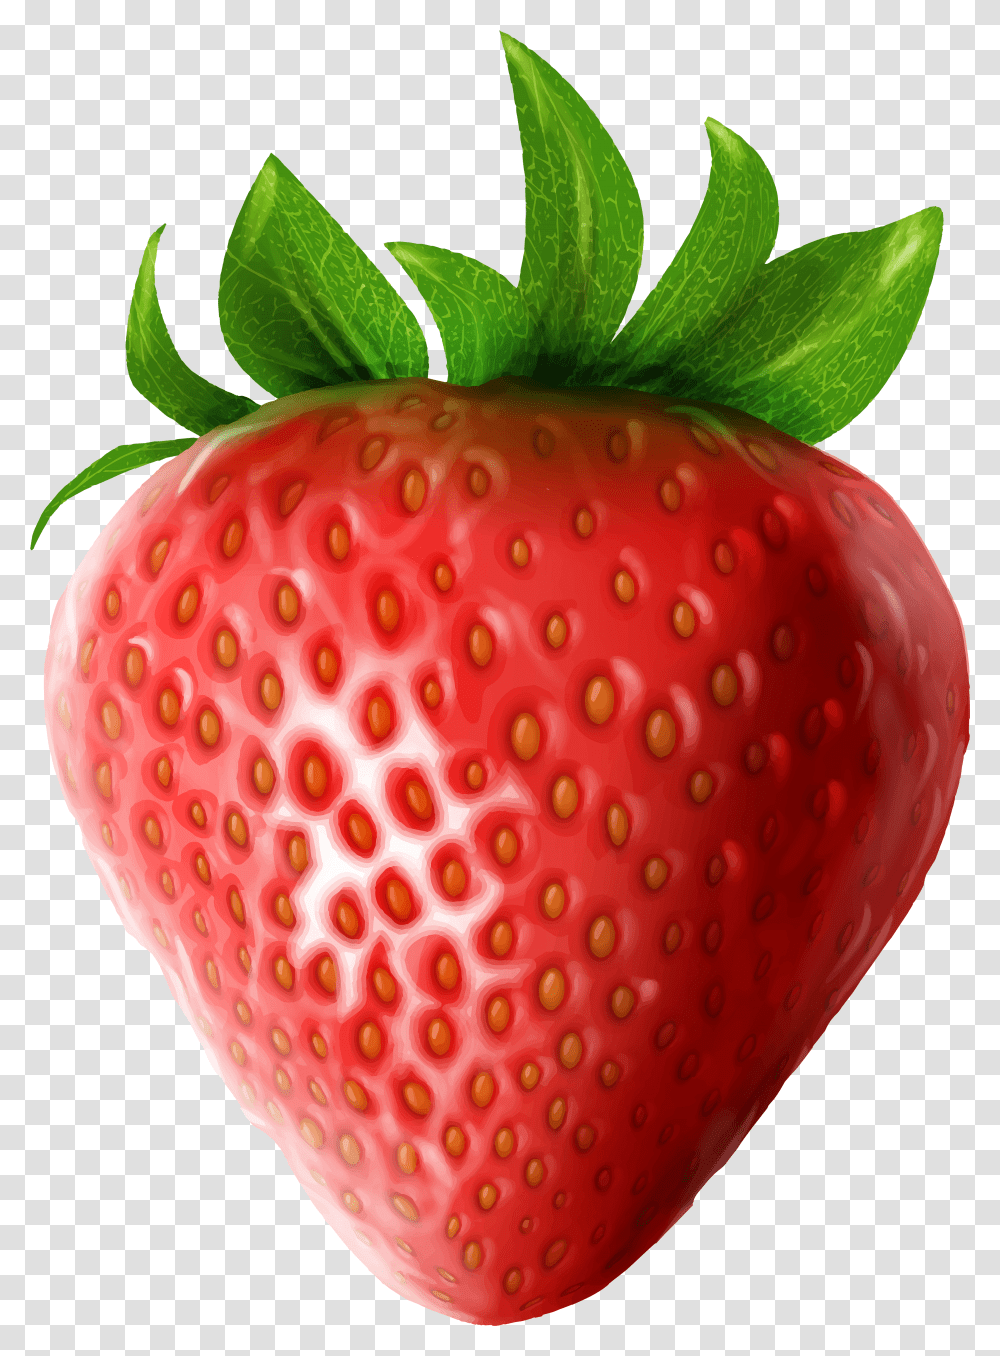 Strawberry Tumblr Download Free Clip Picture Of Strawberry Transparent Png